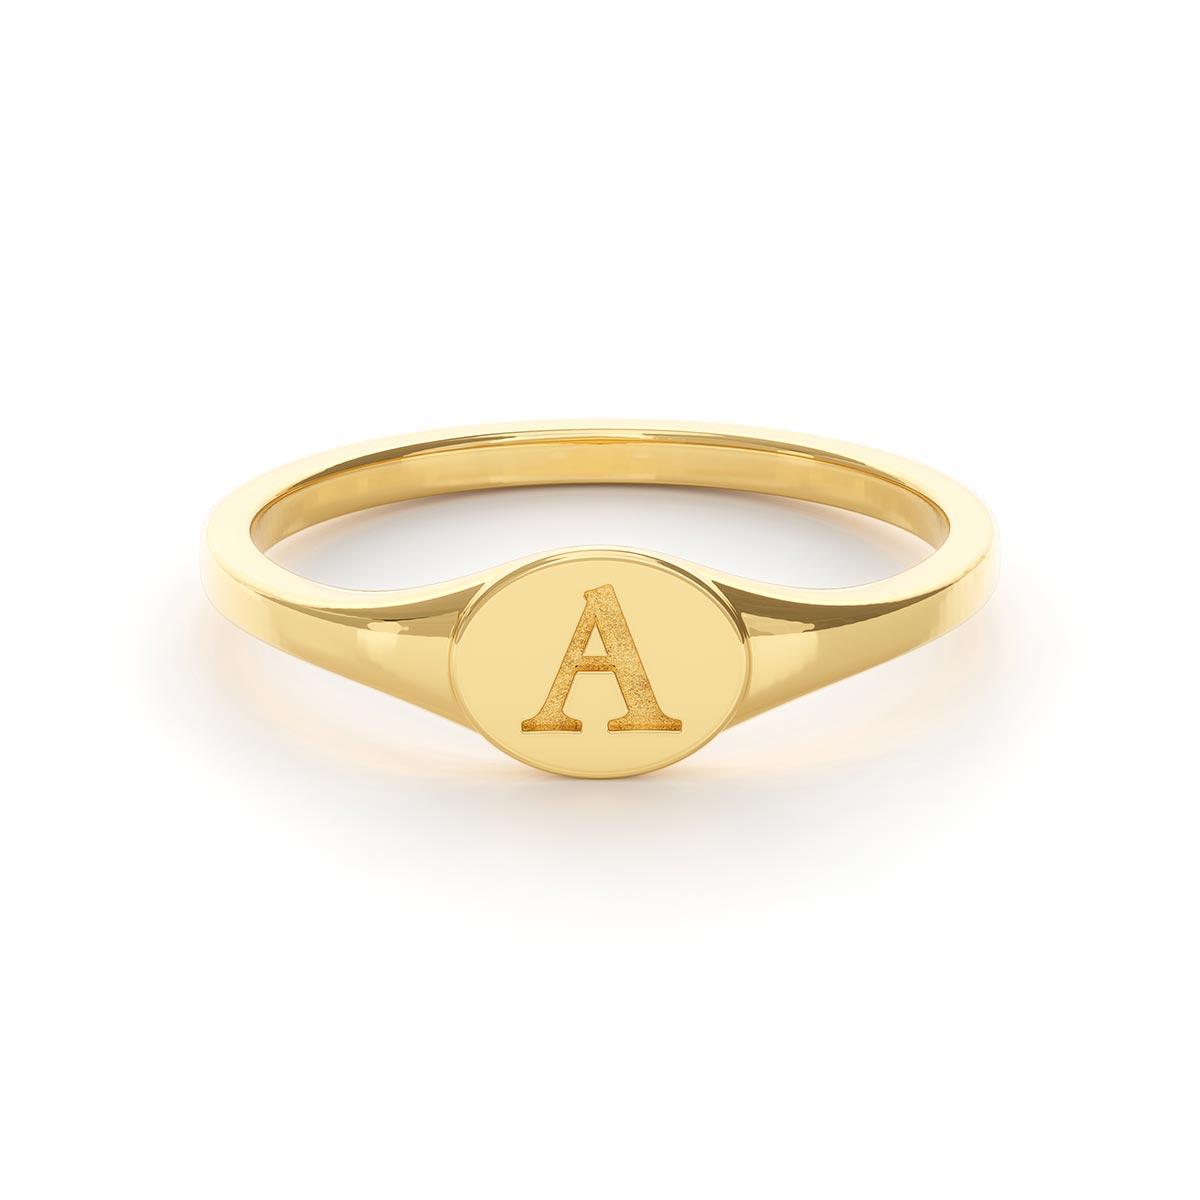 Personalized Initial Signet Ring